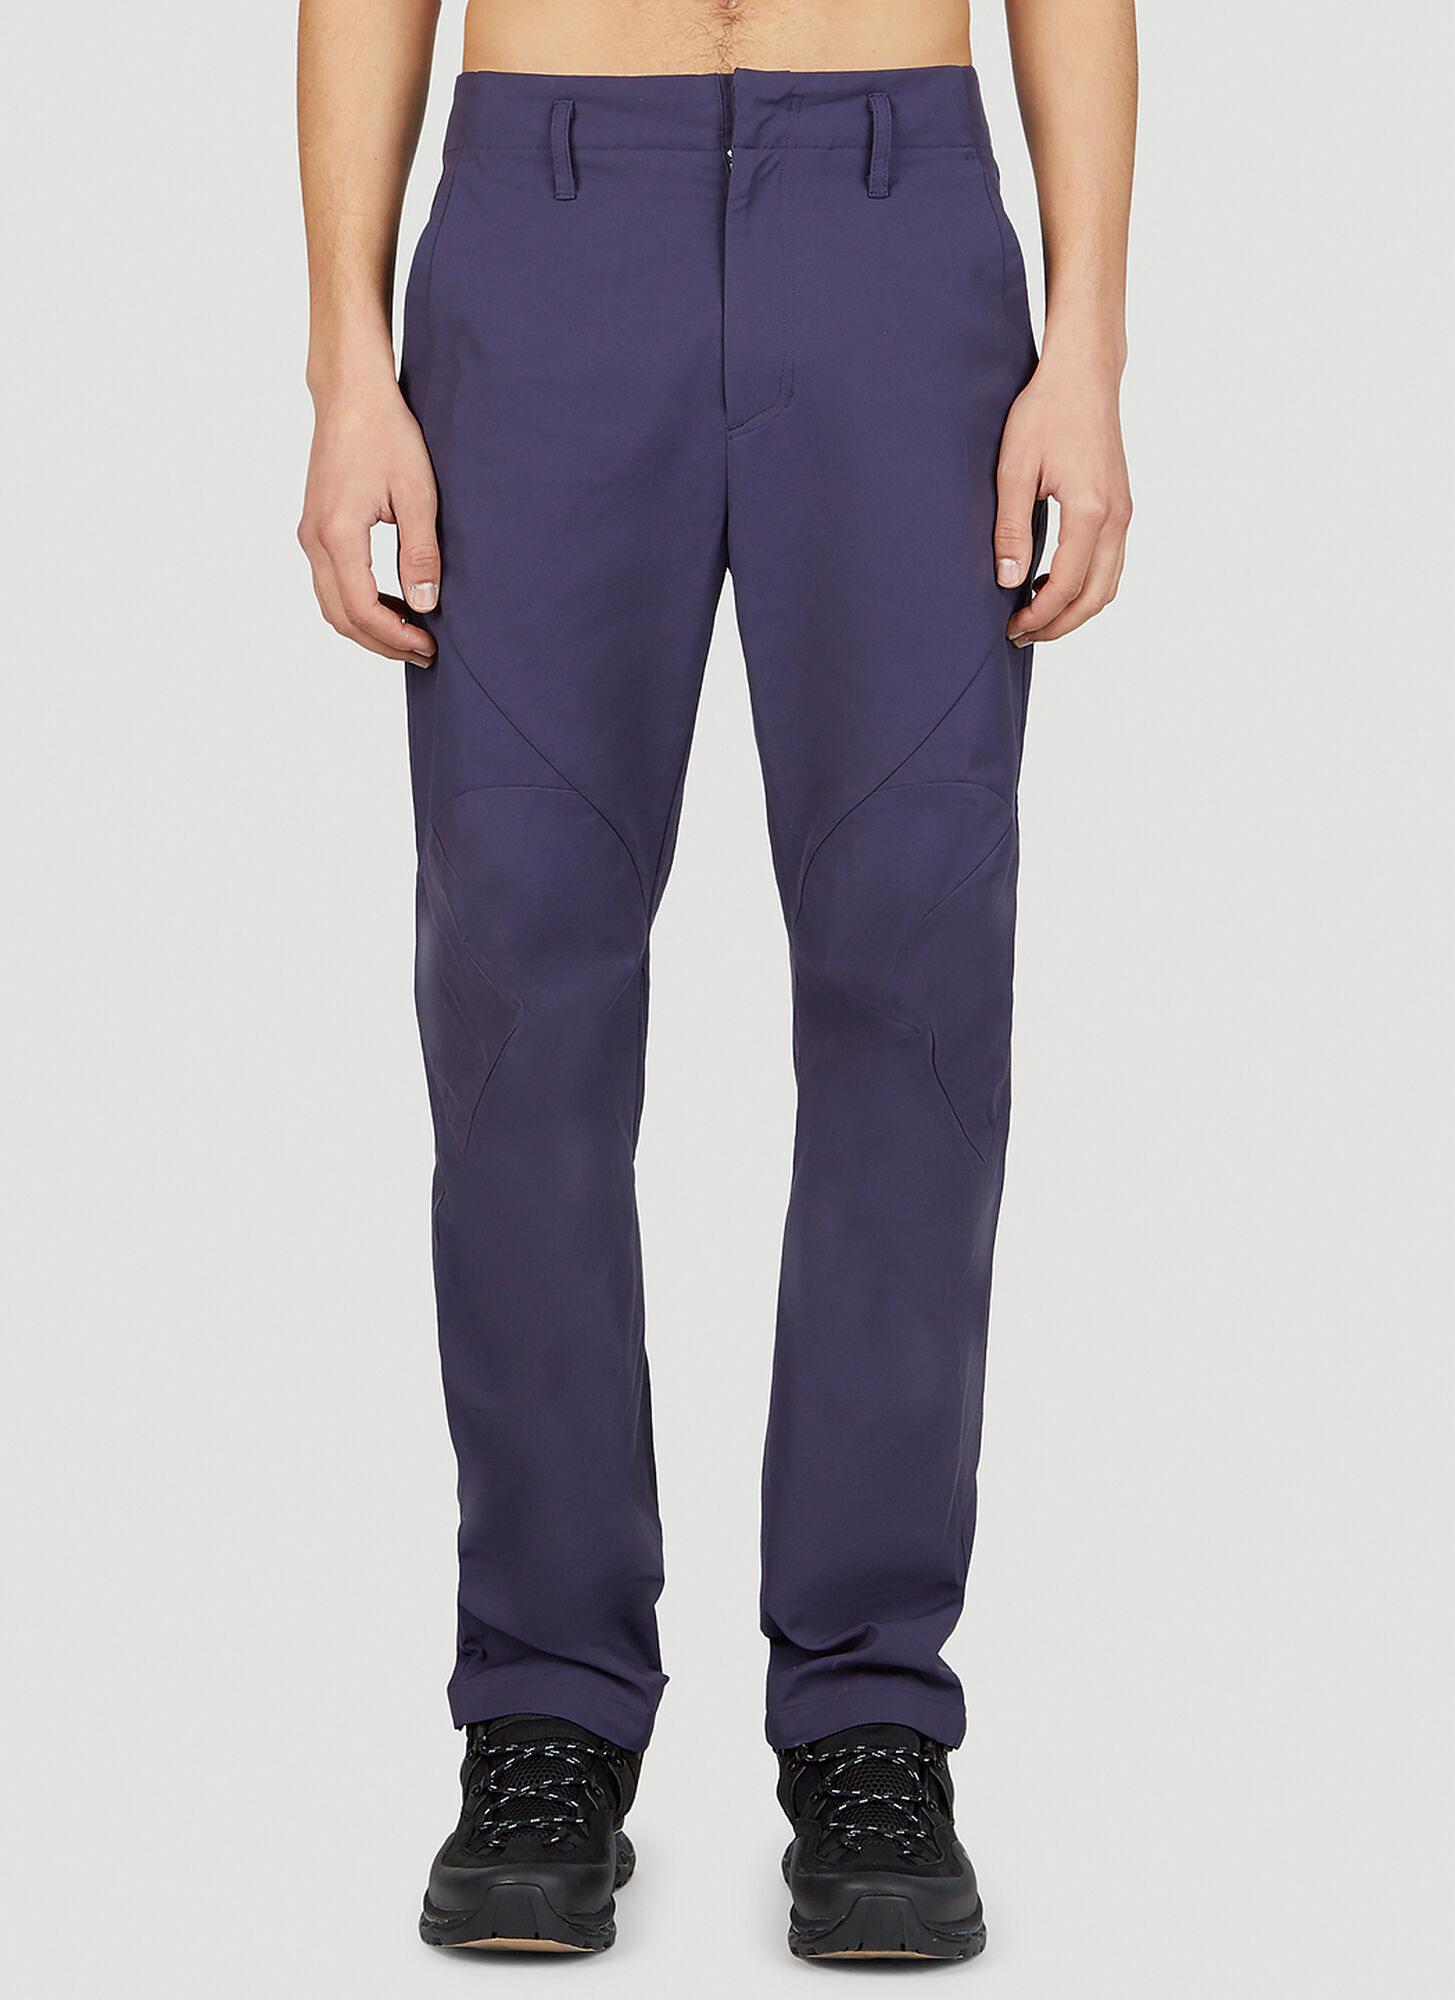 Post Archive Faction (paf) 5.0 Right Pants